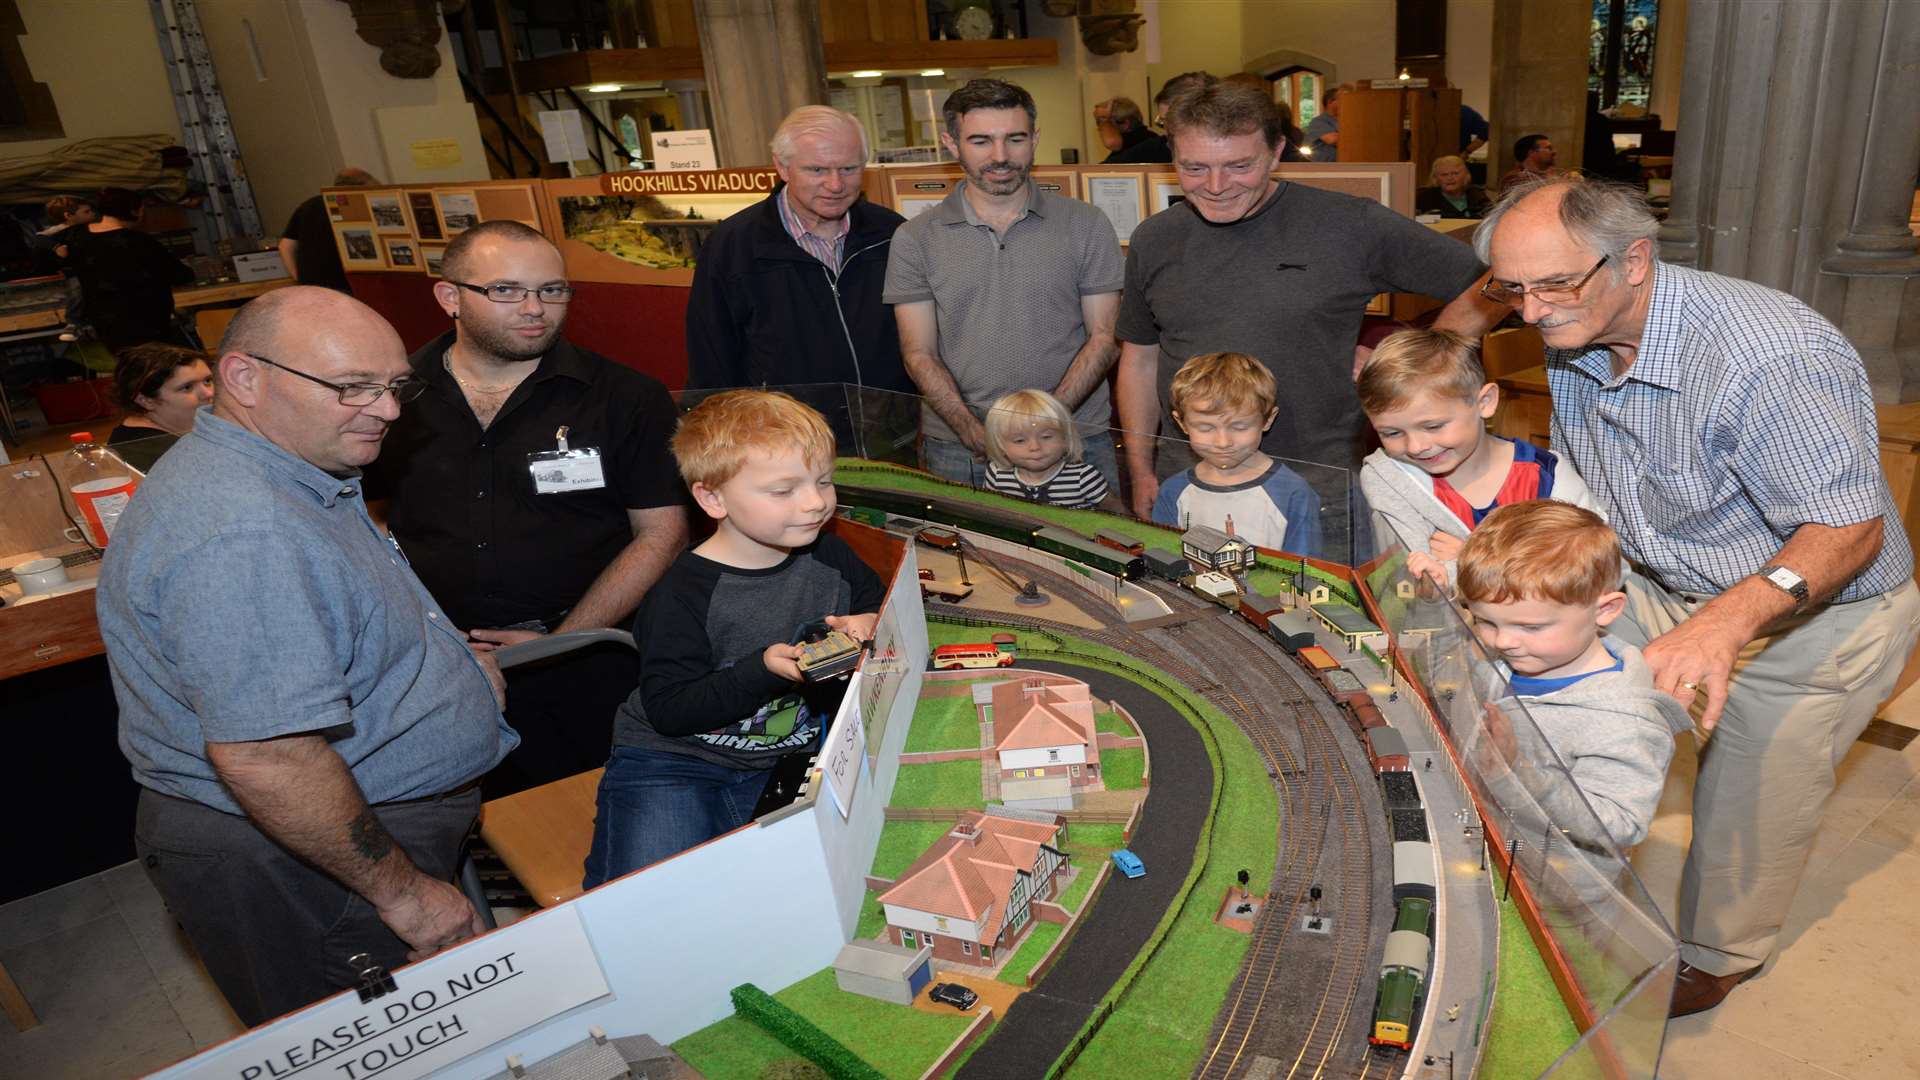 Ben Kinderman who attends the Sunday School and Church at St Michael's, Wilmington was invited to take control of one of the trains on the Hawkenbury layout at the model railway exhibition in the church and hall on Saturday. Picture: Chris Davey